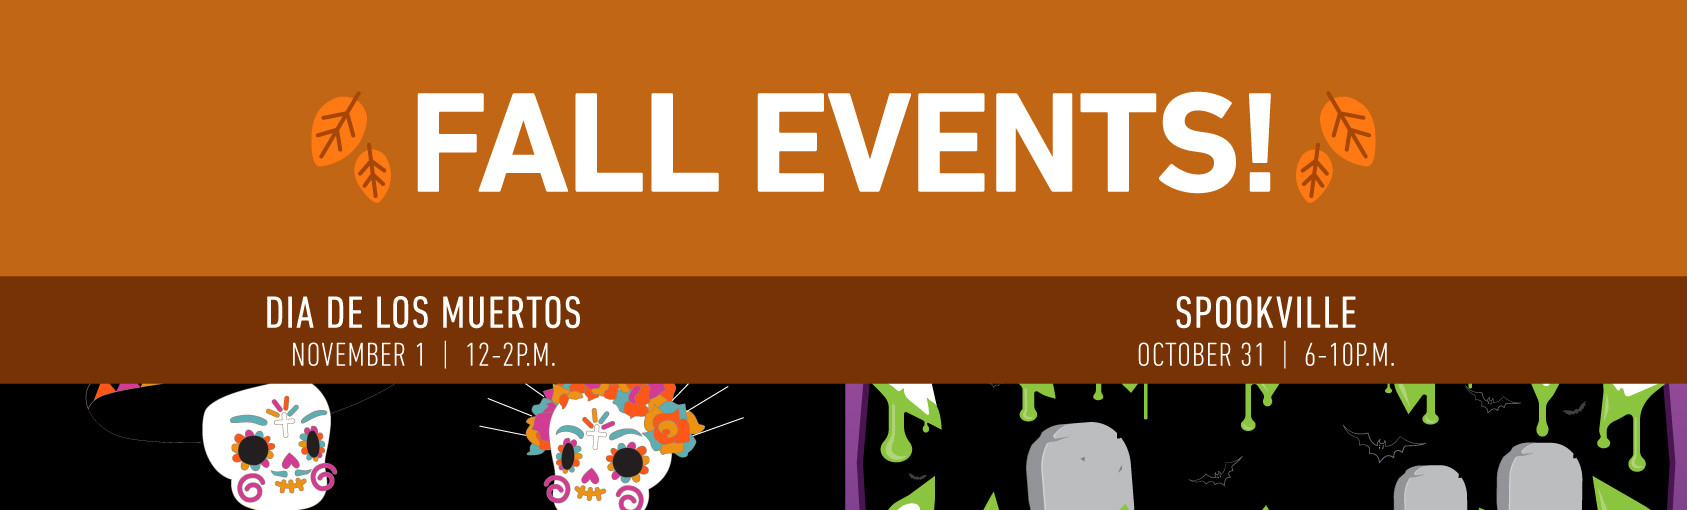 Fall Events banner